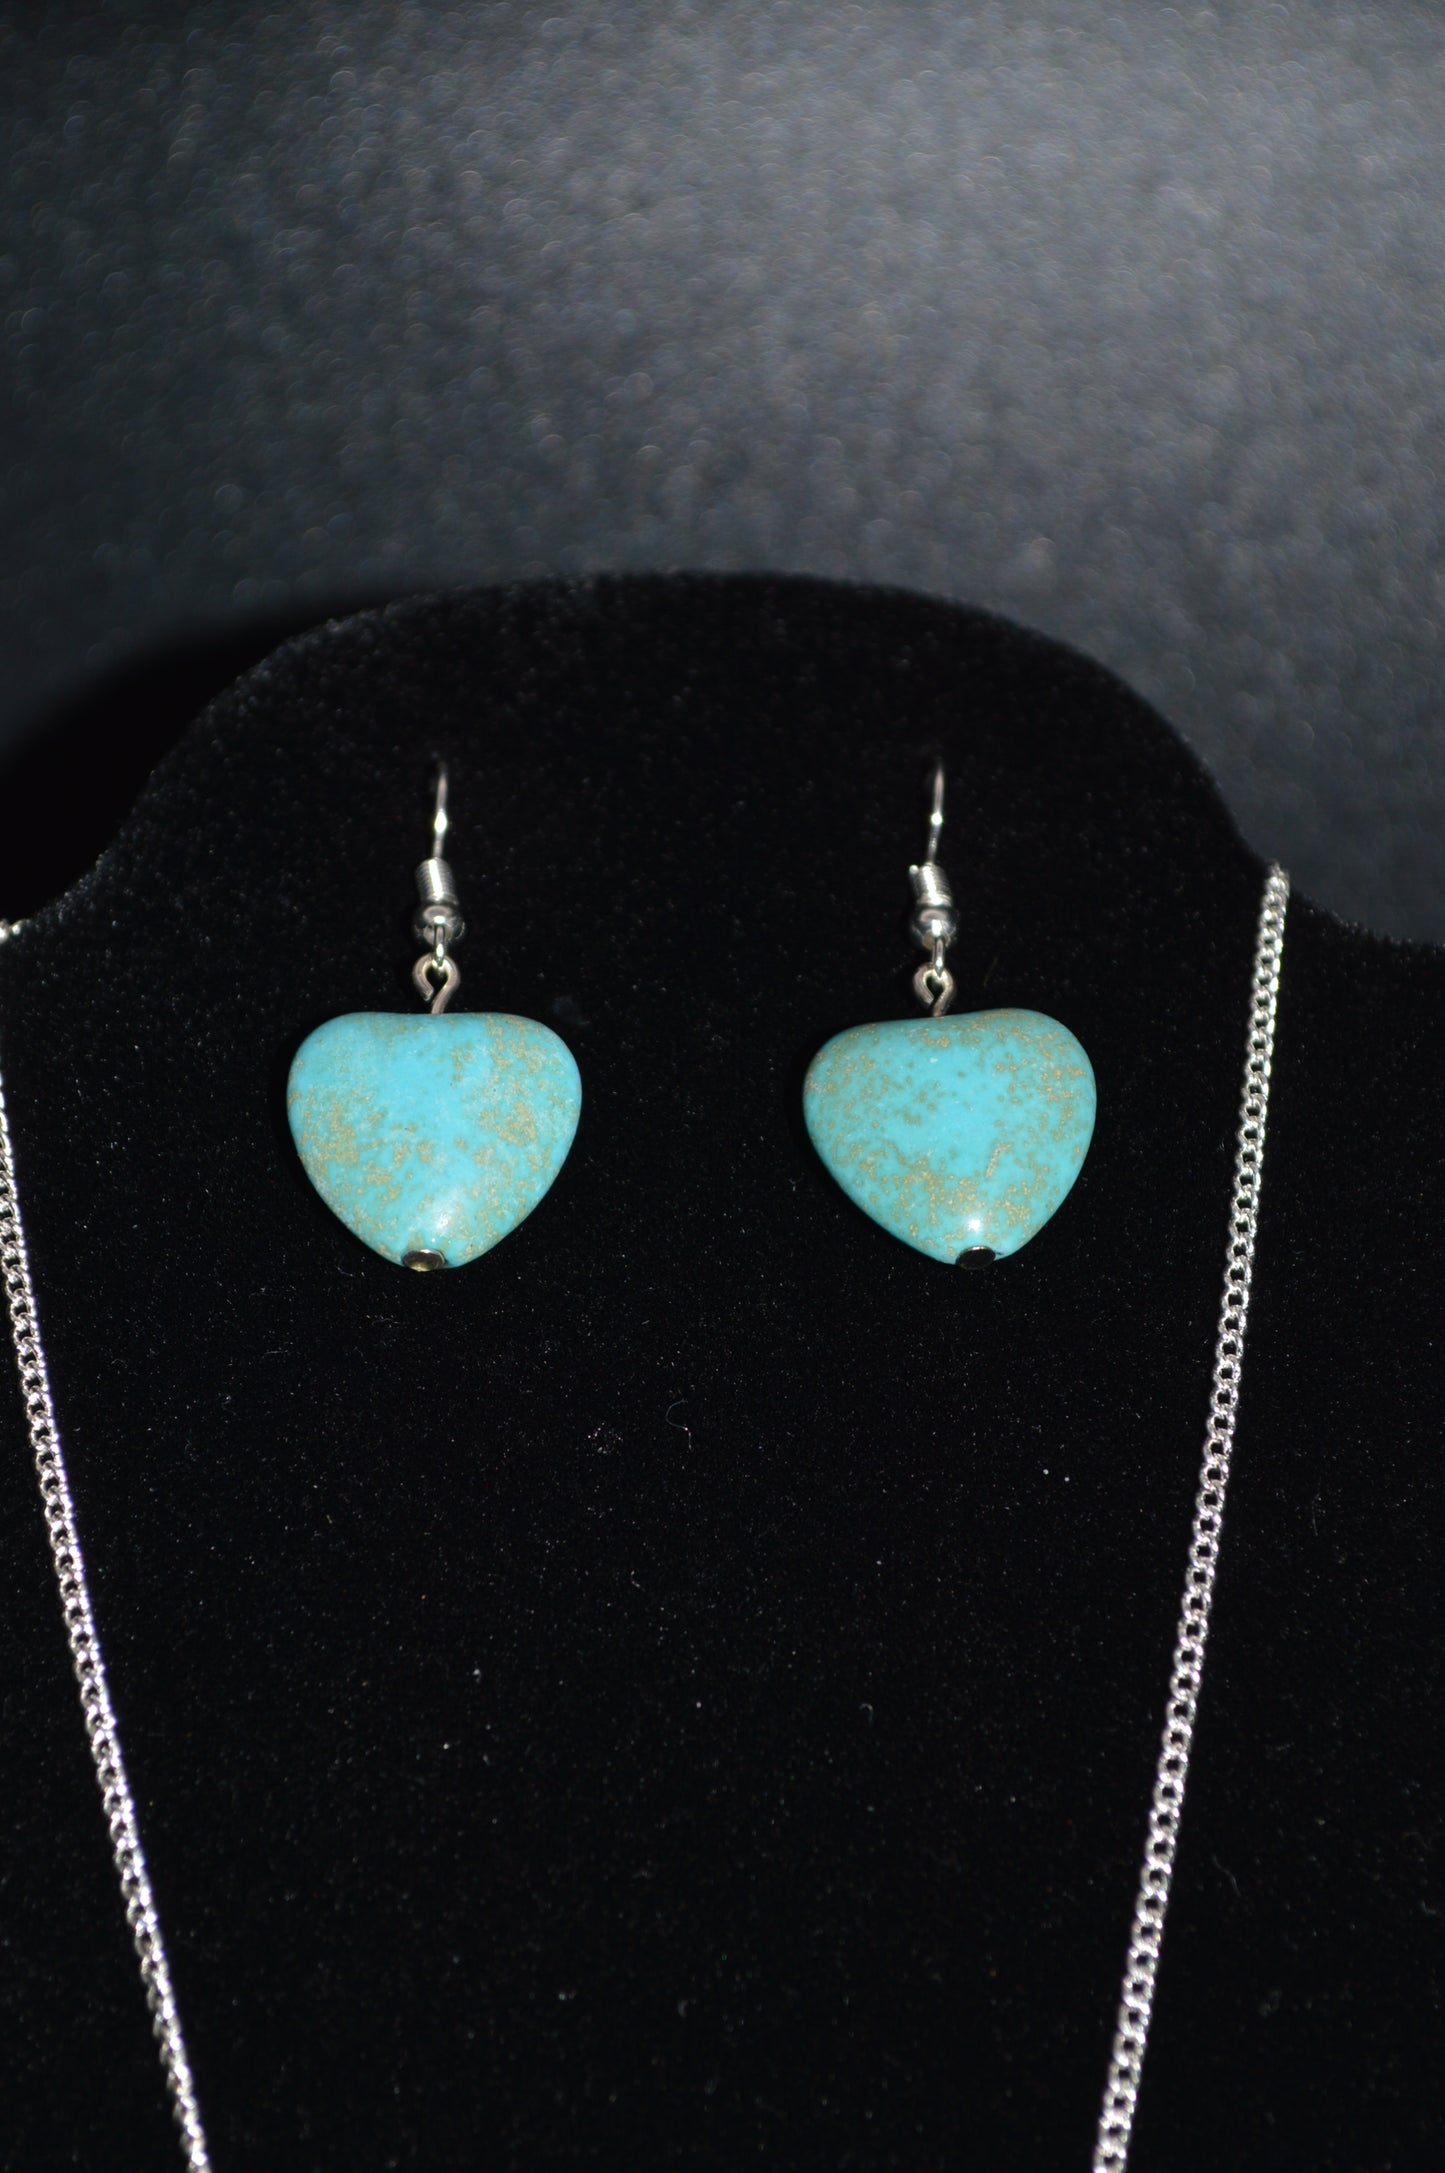 Magnesite Small Heart Pendant Necklace and Earring Set (Turquoise)